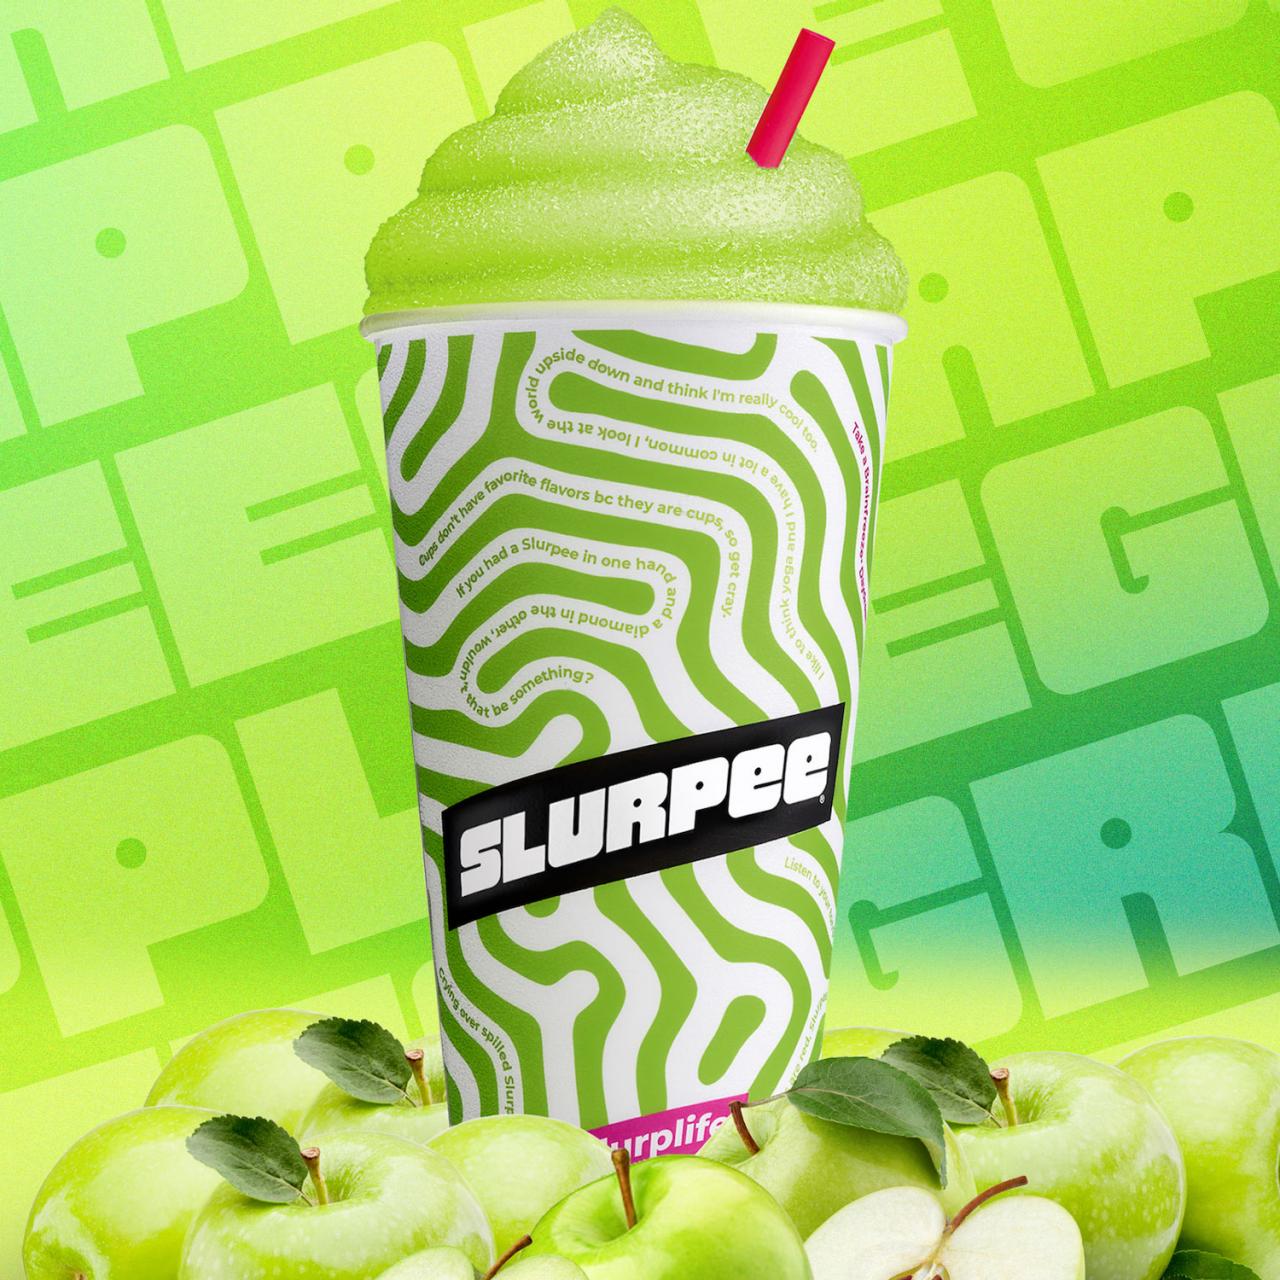 Free Slurpee Day guide: What flavor should you try on 7/11?